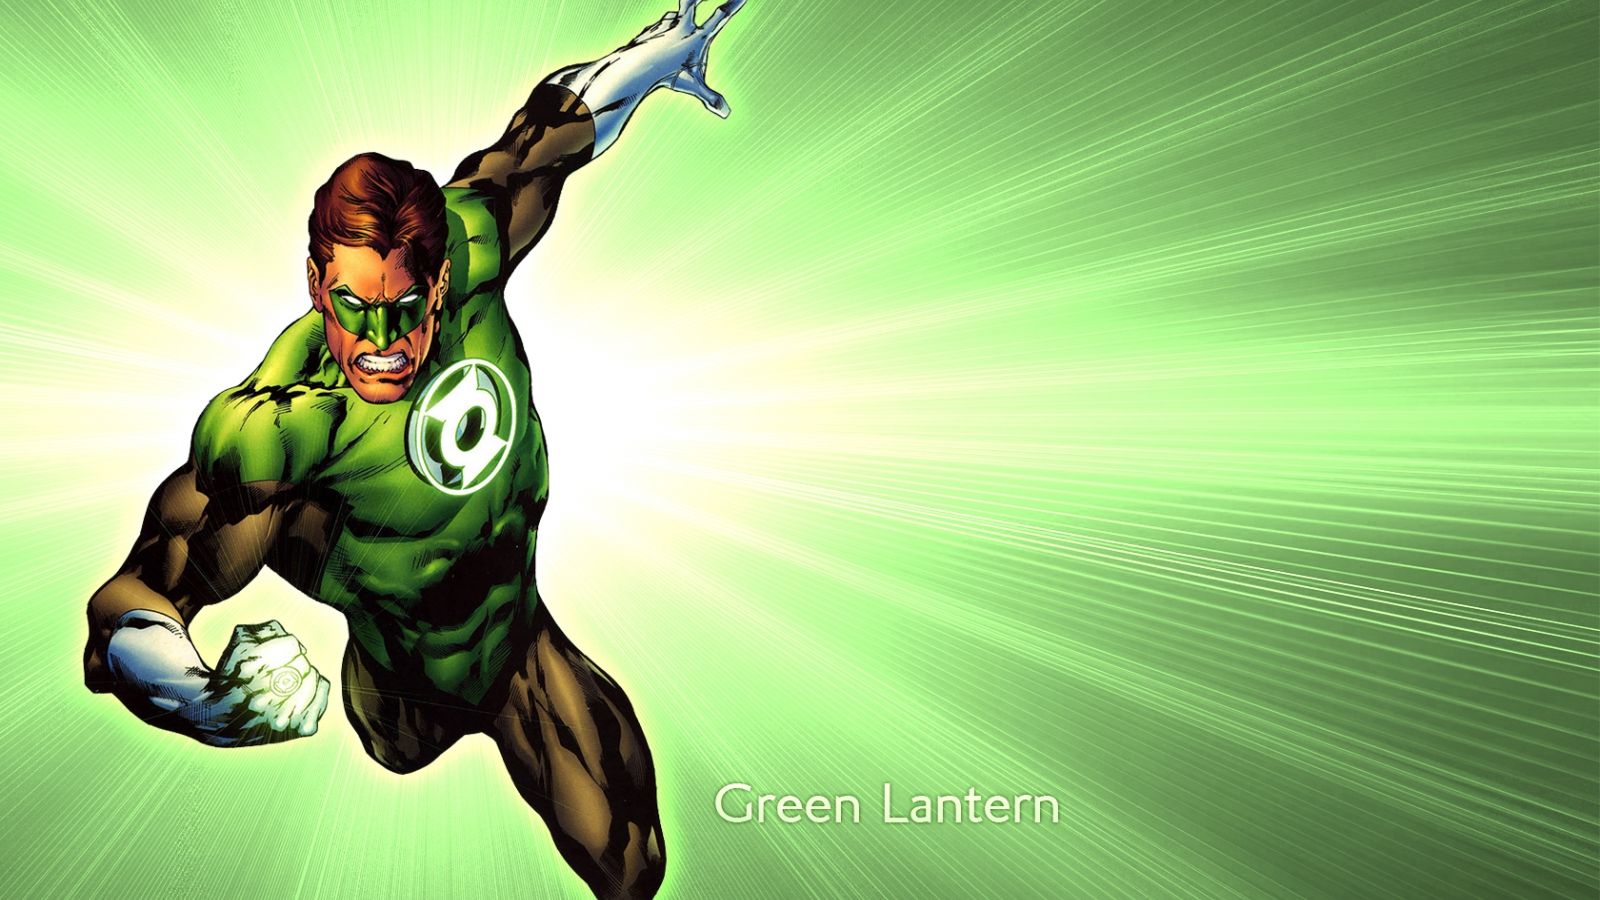 Free download Check this out our new Green Lantern wallpaper DC